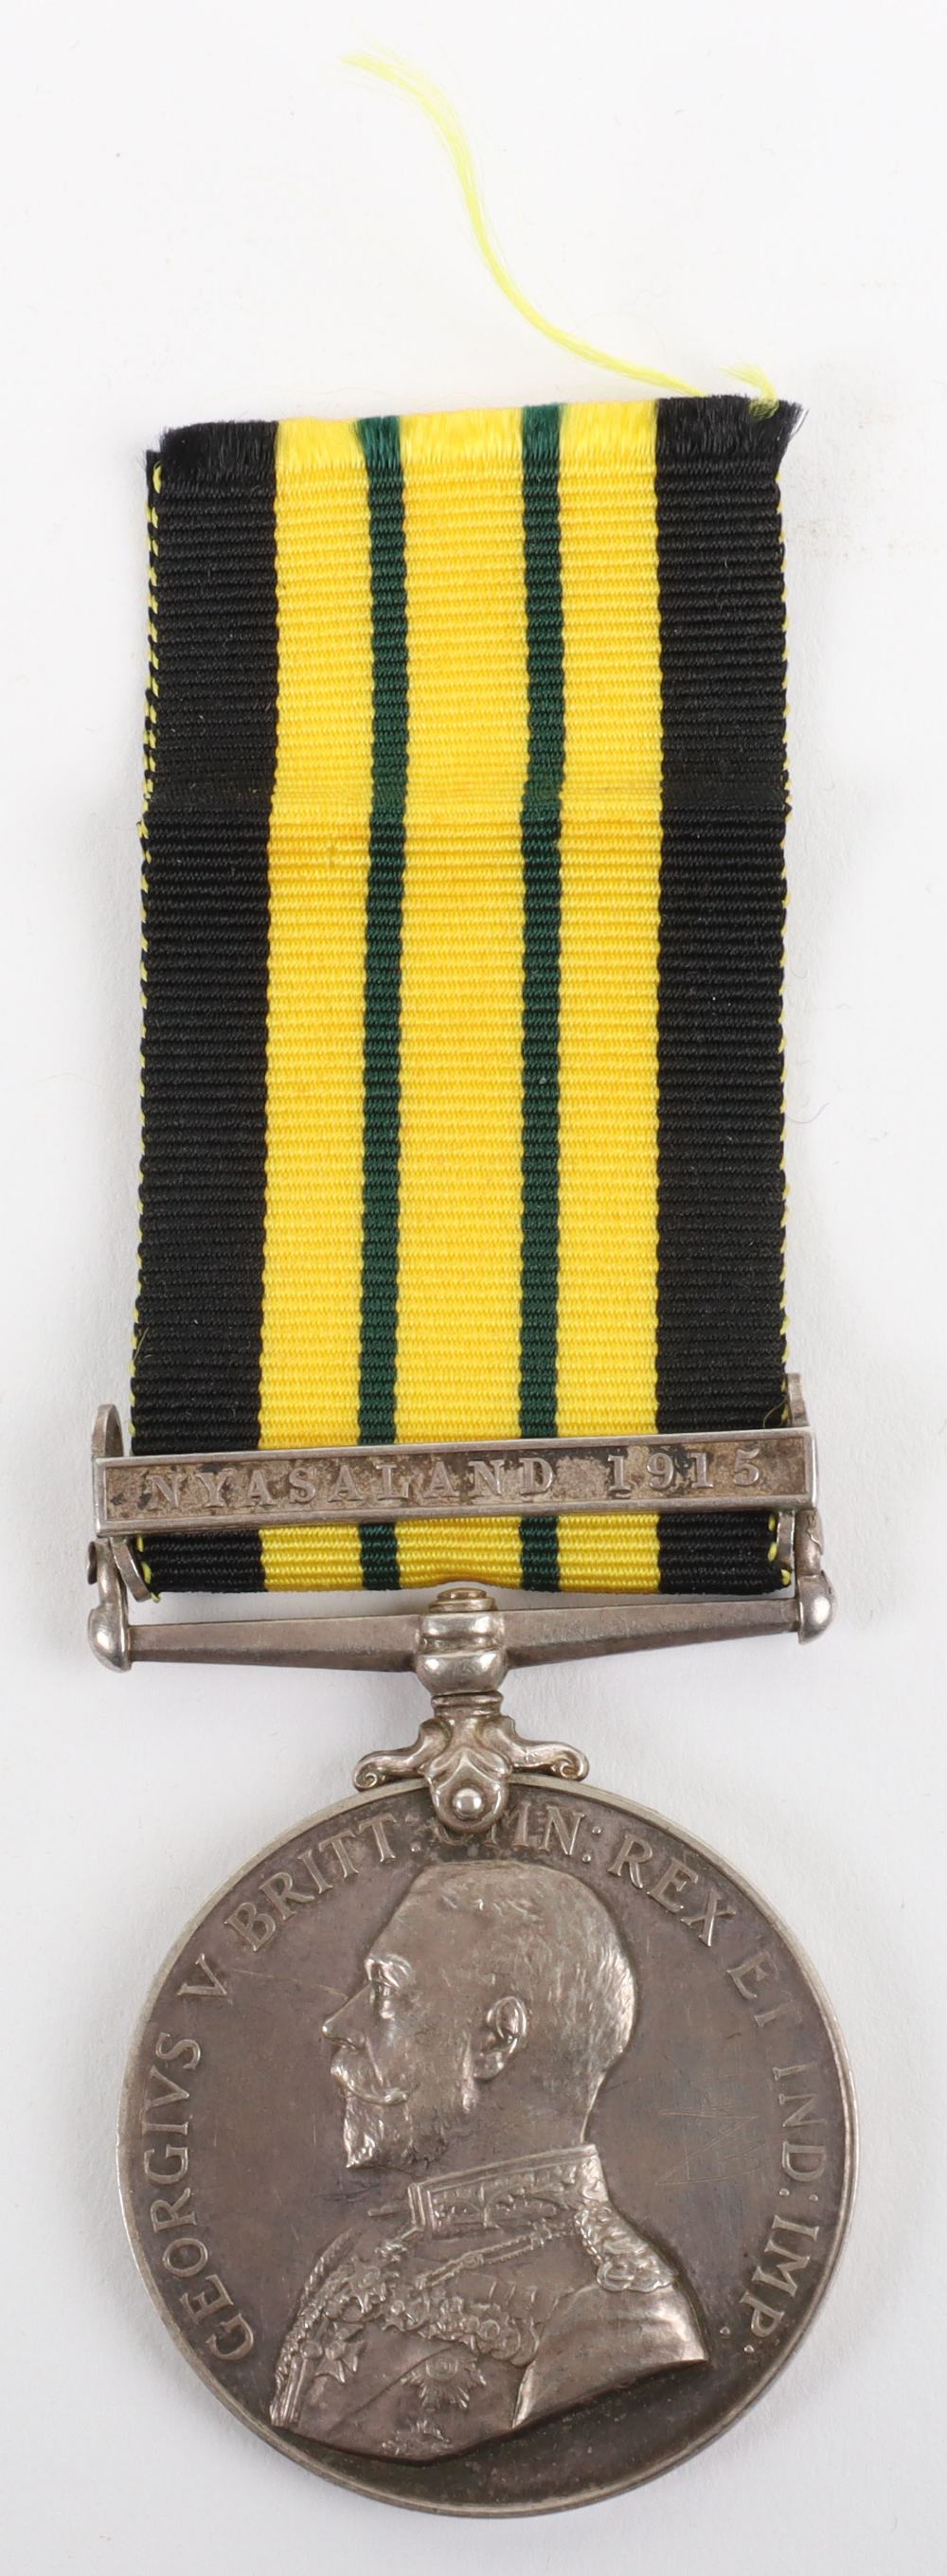 An Unusual Africa General Service Medal for Service in Quelling the Chilembwe Uprising in the Shire